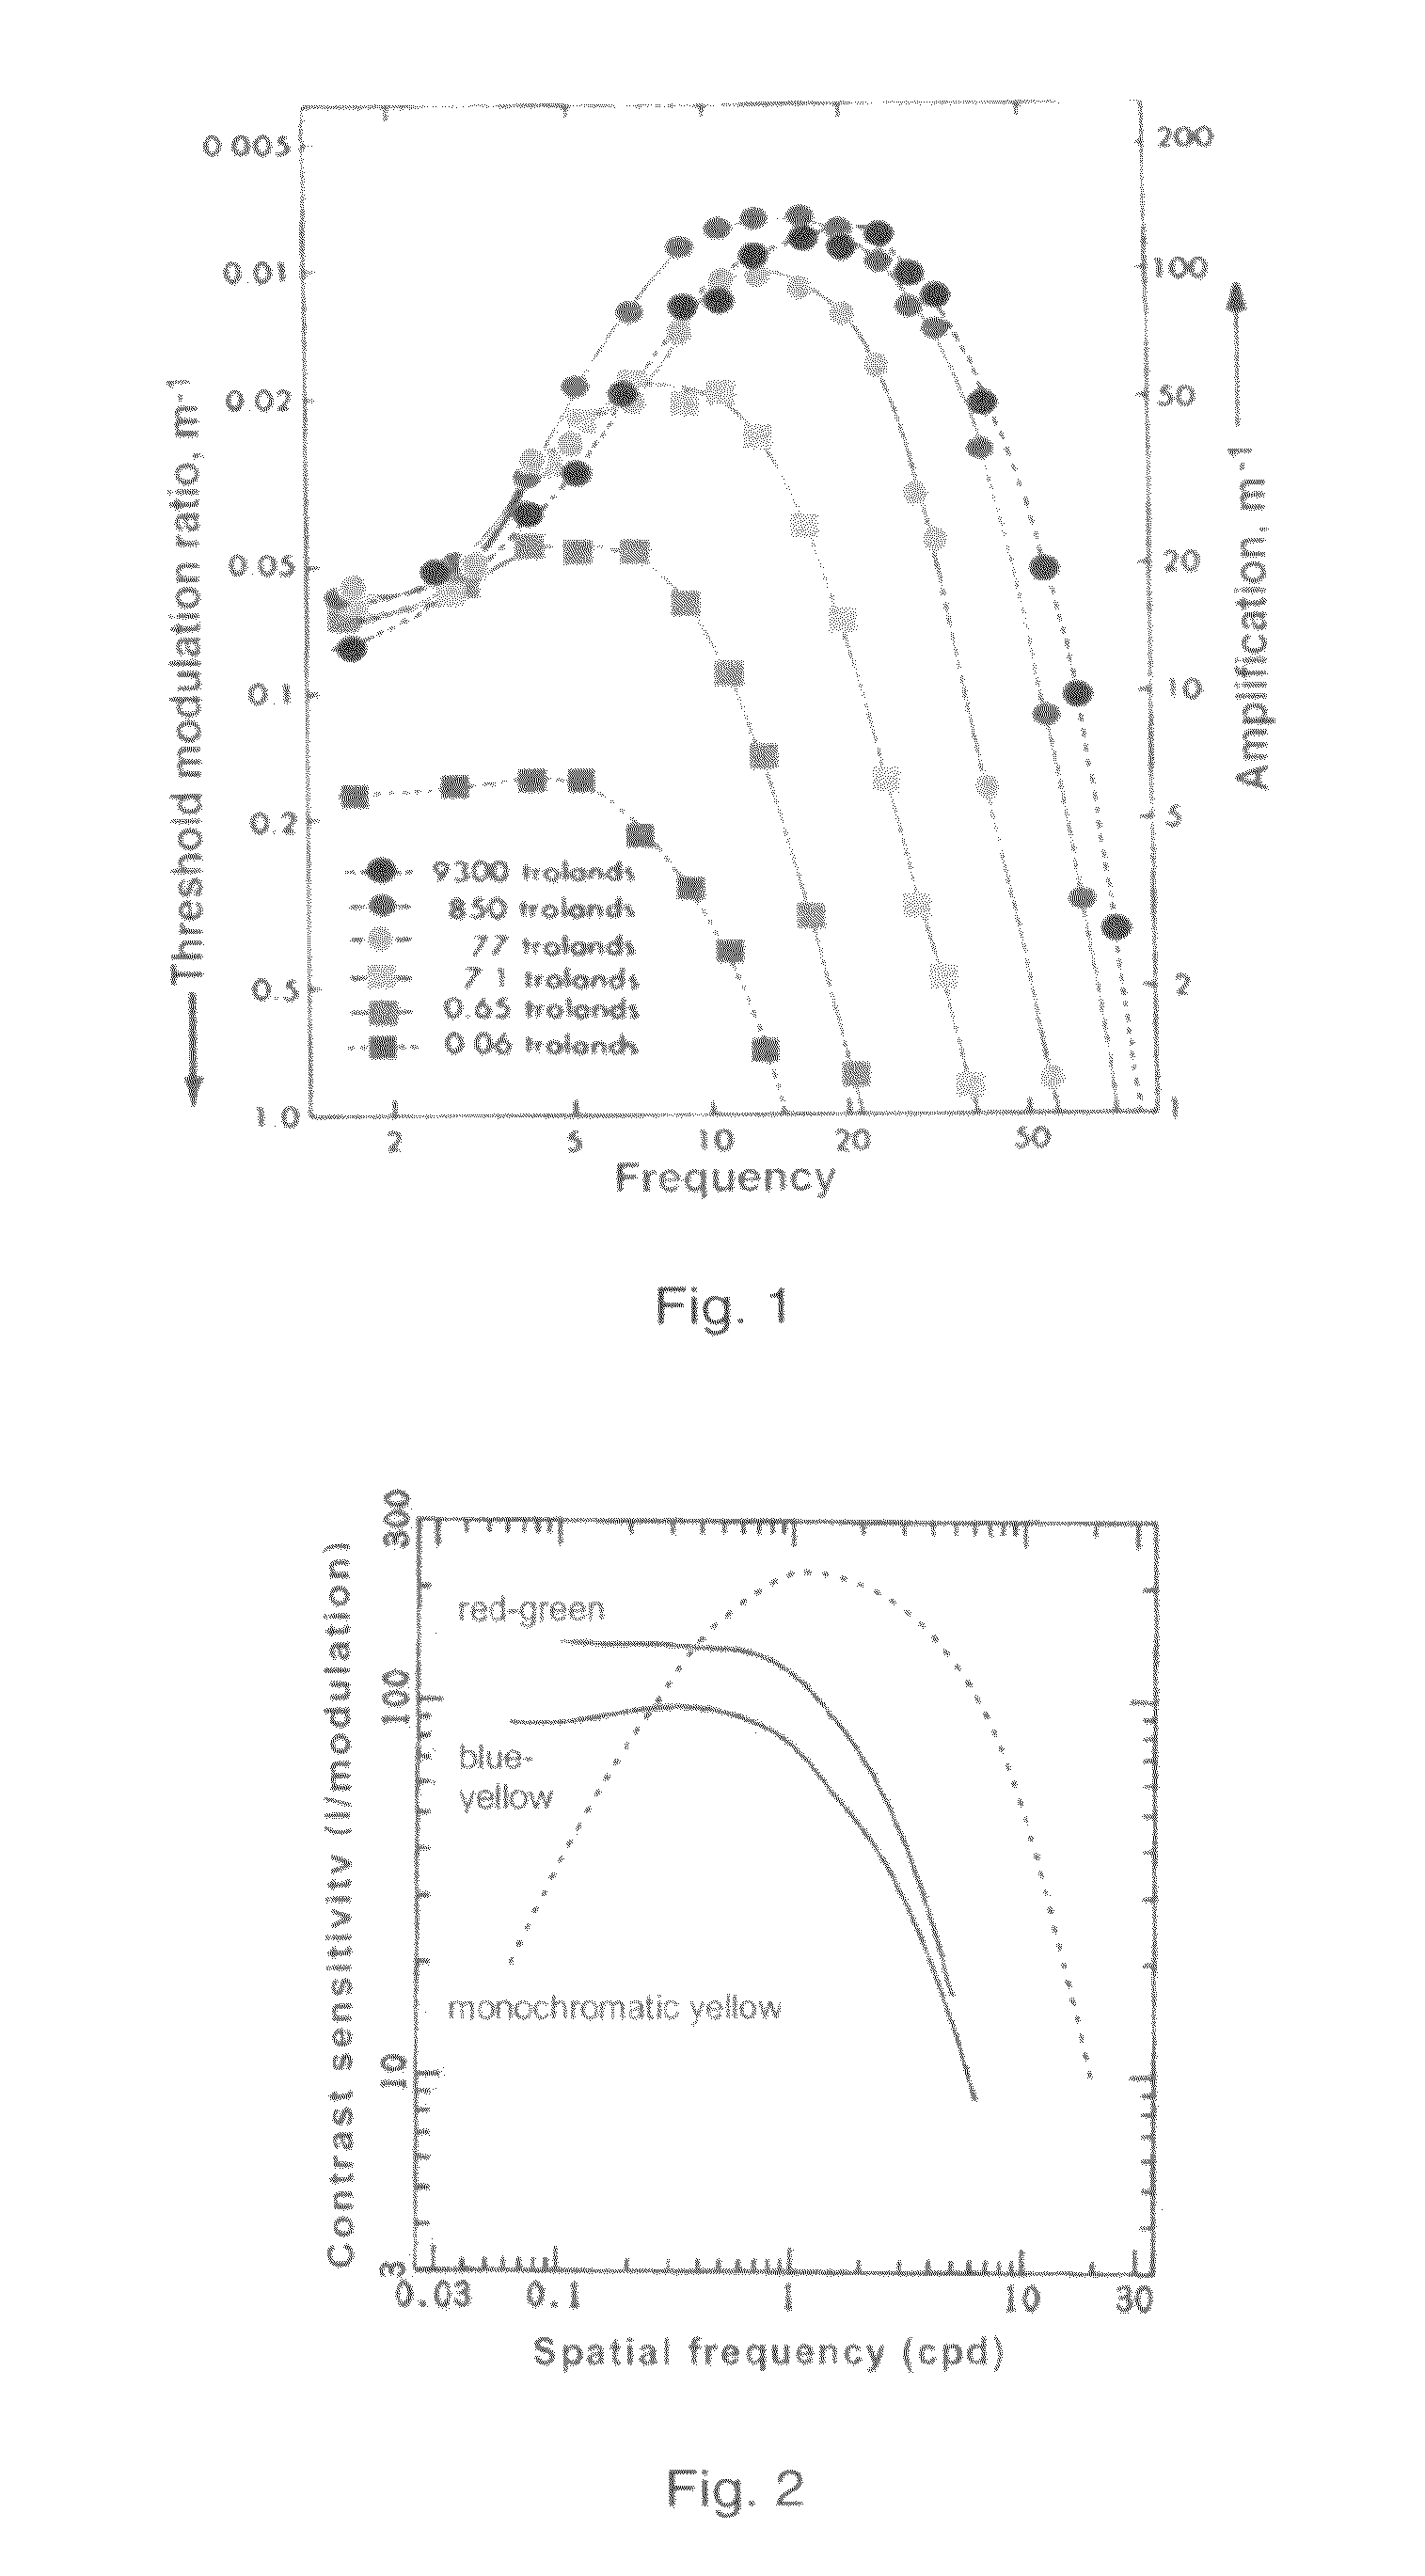 Method for sequentially displaying a colour image